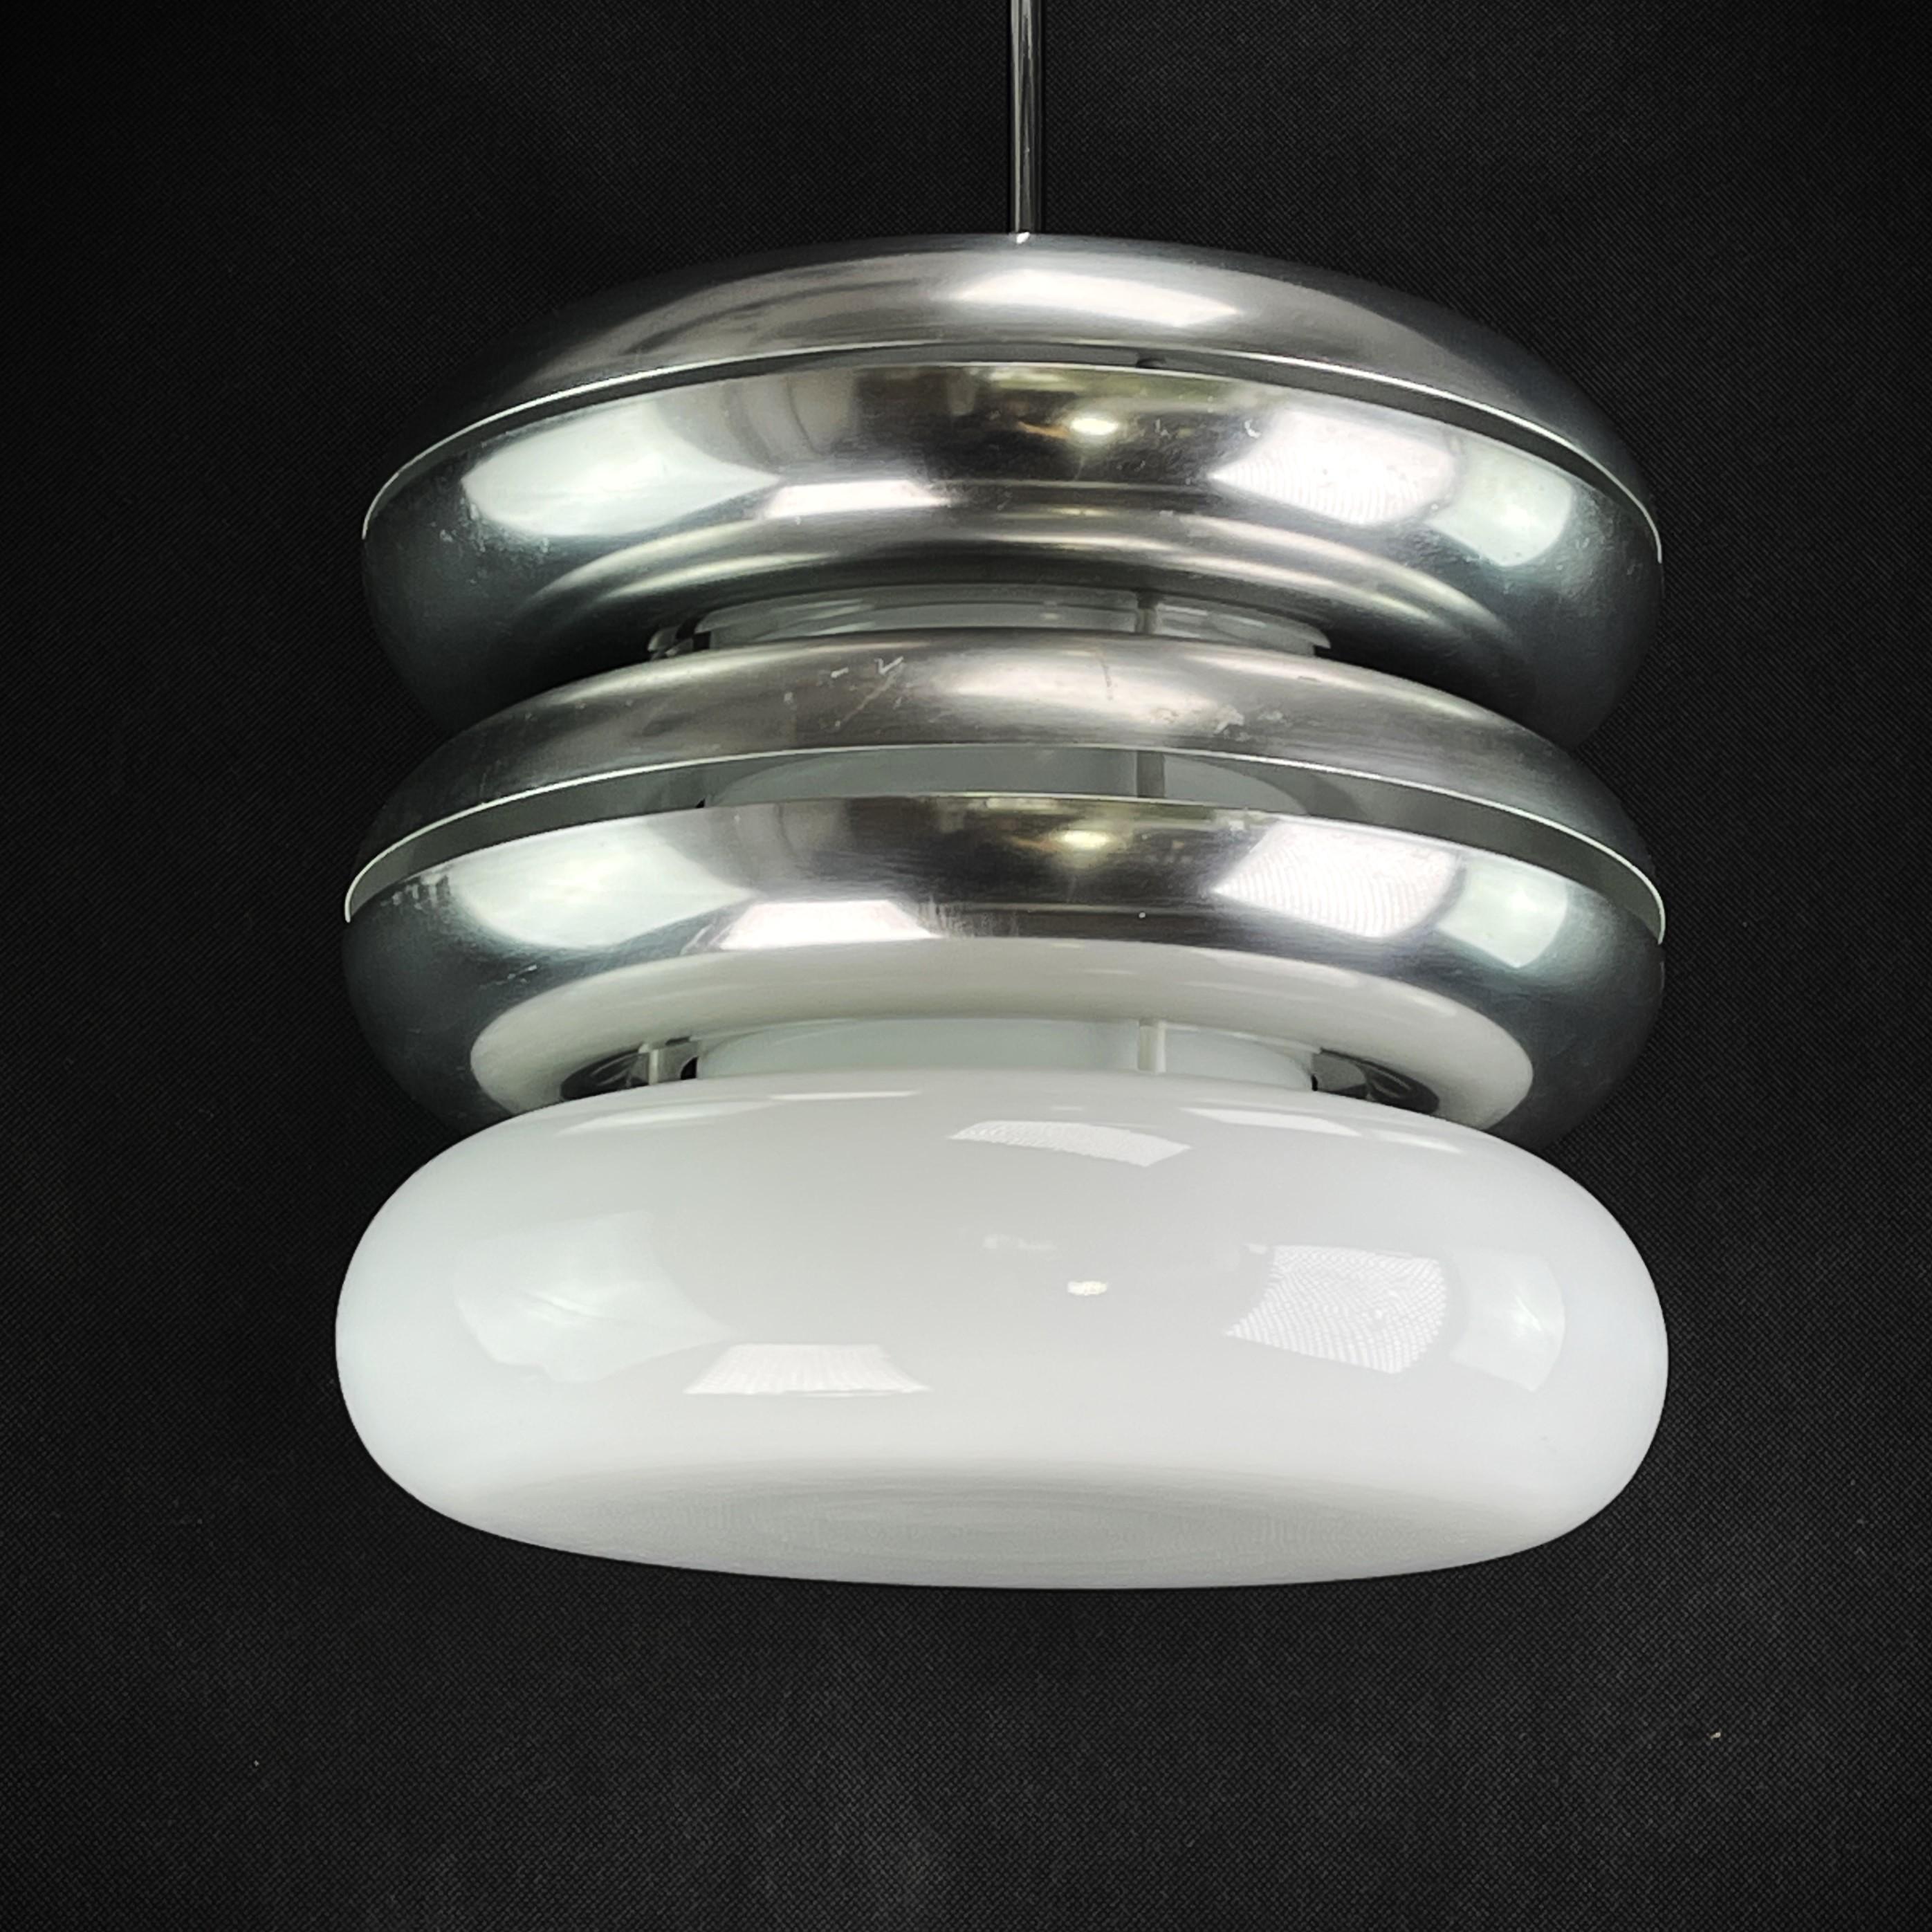 Doria ceiling lamp, model 6803

The designer lamp is a real classic from the 70s. The lounge lamp from Doria is an original and gives a pleasant light. 

Large Doria lamp is a stylish and elegant hanging lamp in the characteristic design of the 70s.